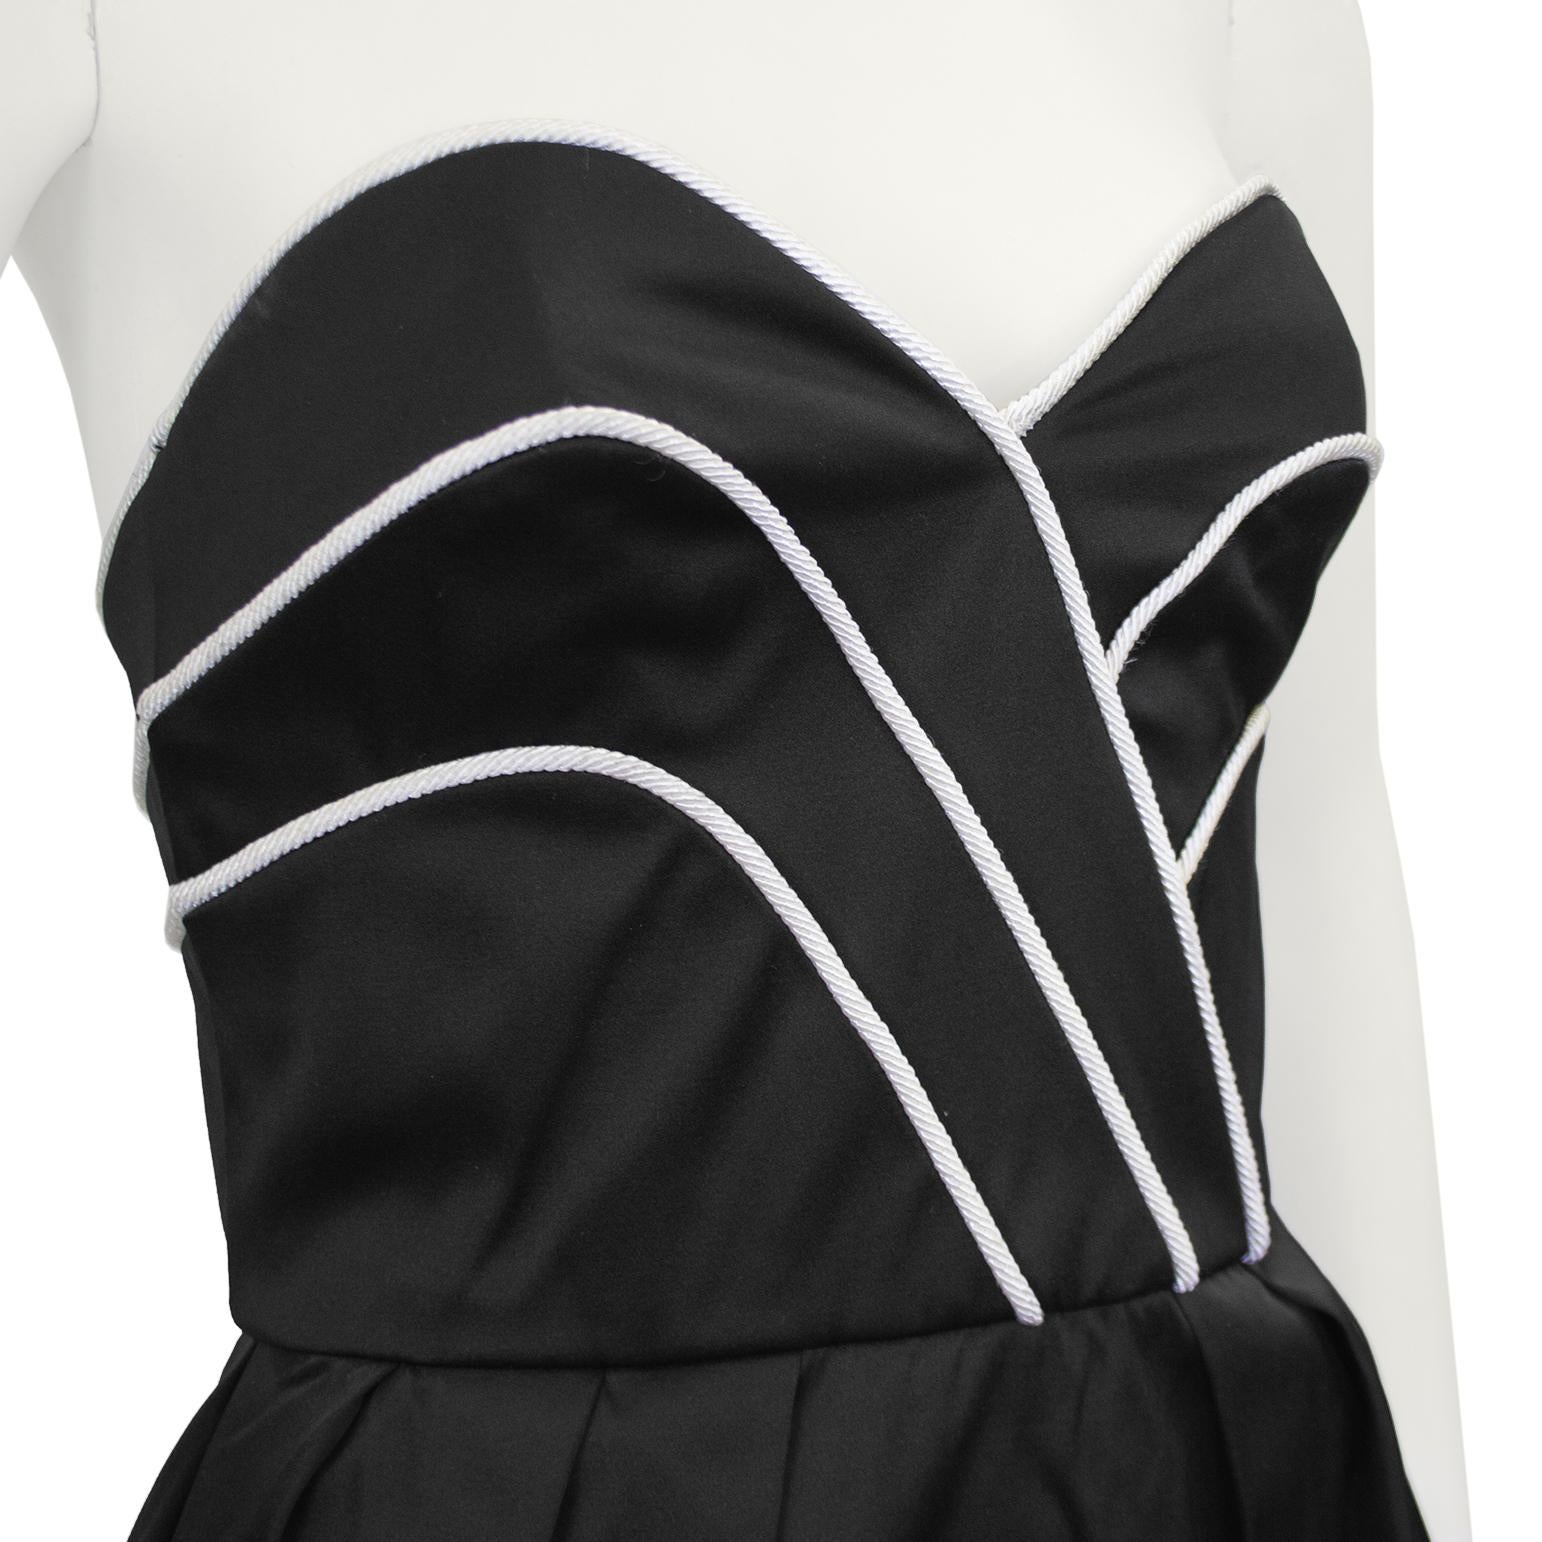 Women's 1980s Lanvin Black Satin Cocktail Dress with White Piping For Sale